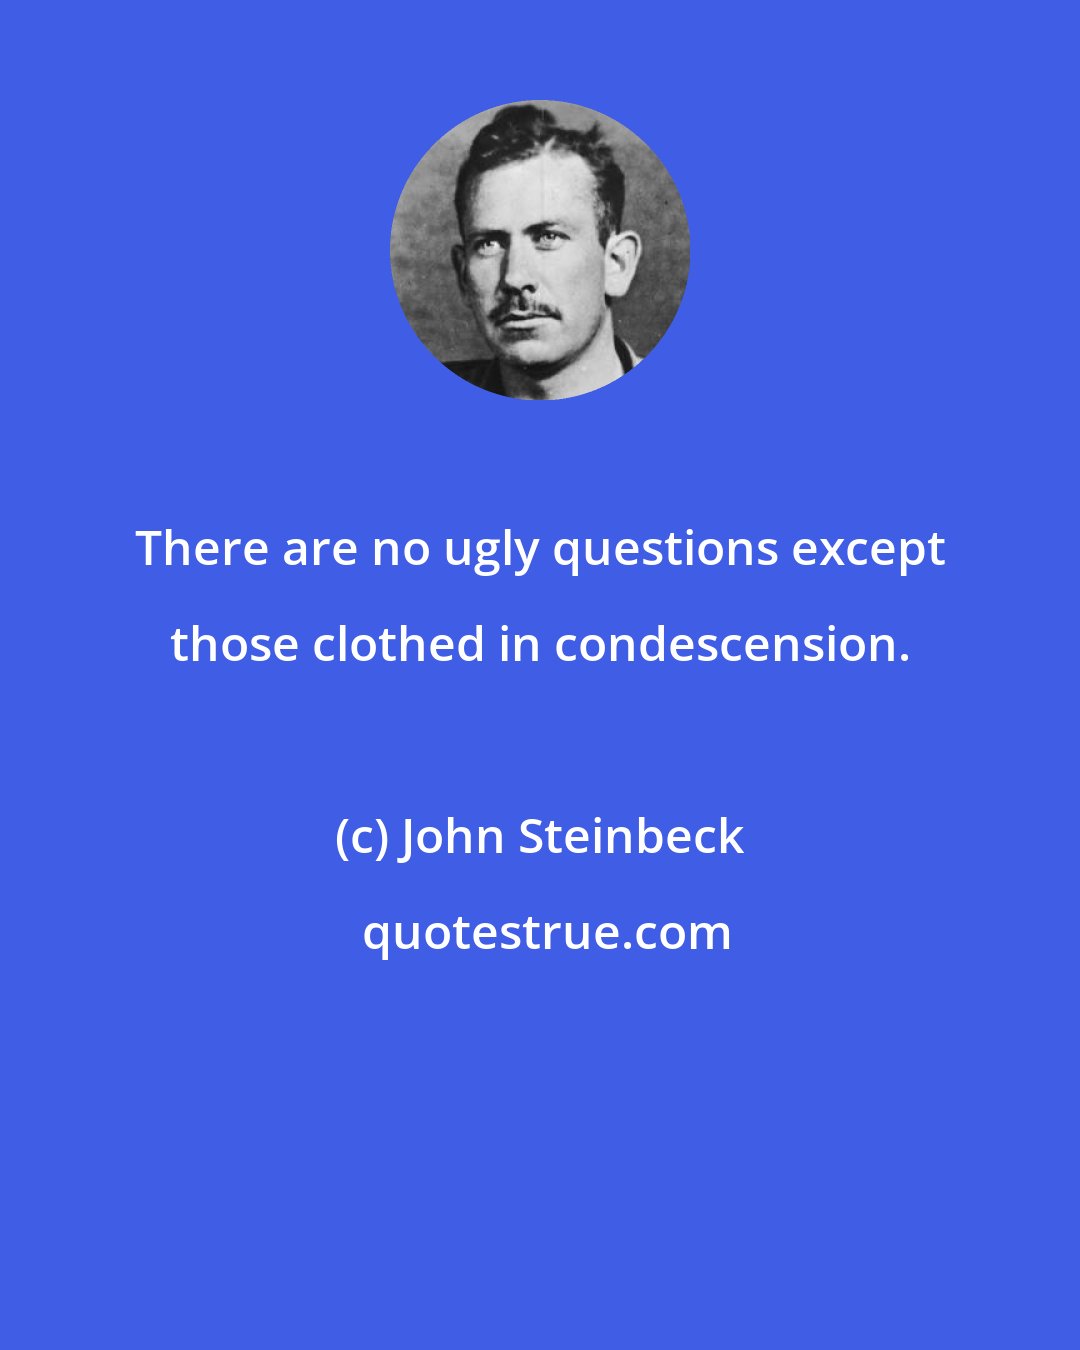 John Steinbeck: There are no ugly questions except those clothed in condescension.